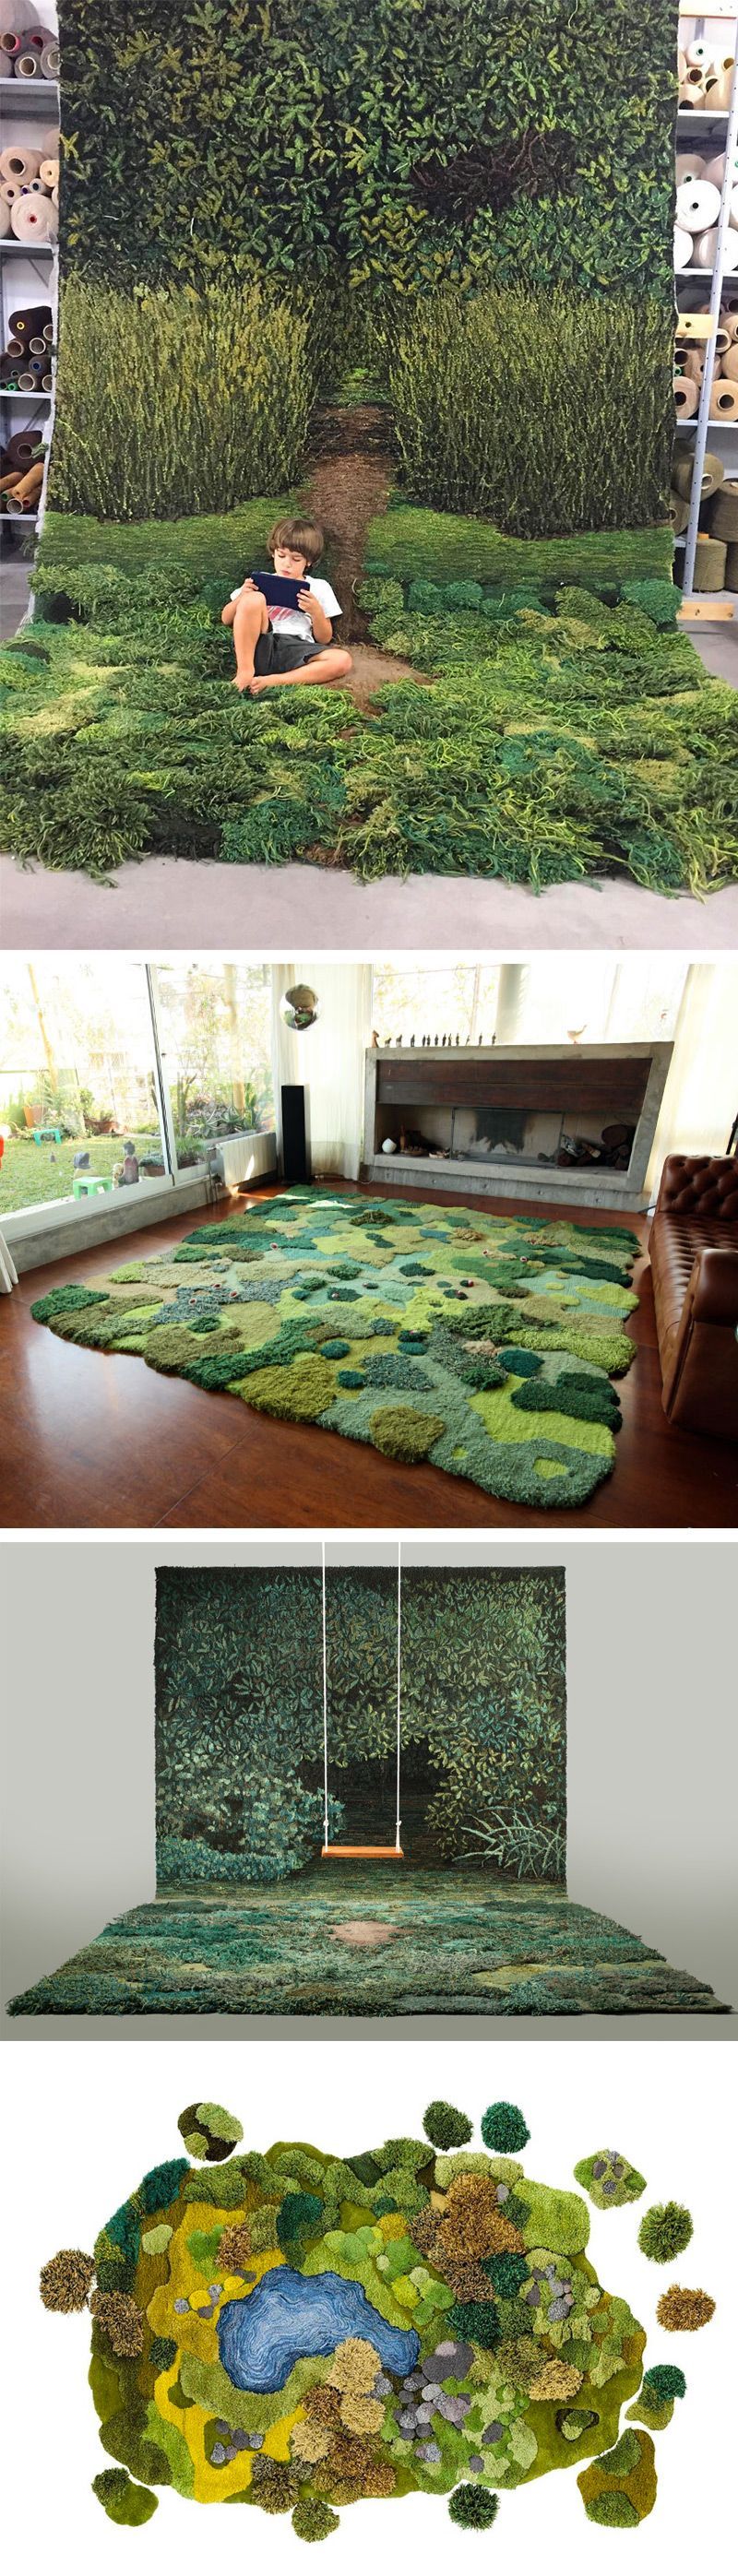 One-of-Kind Wool Rug Artworks by Alexandra Kehayoglou Mimic Rolling Pastures and Mossy Textures